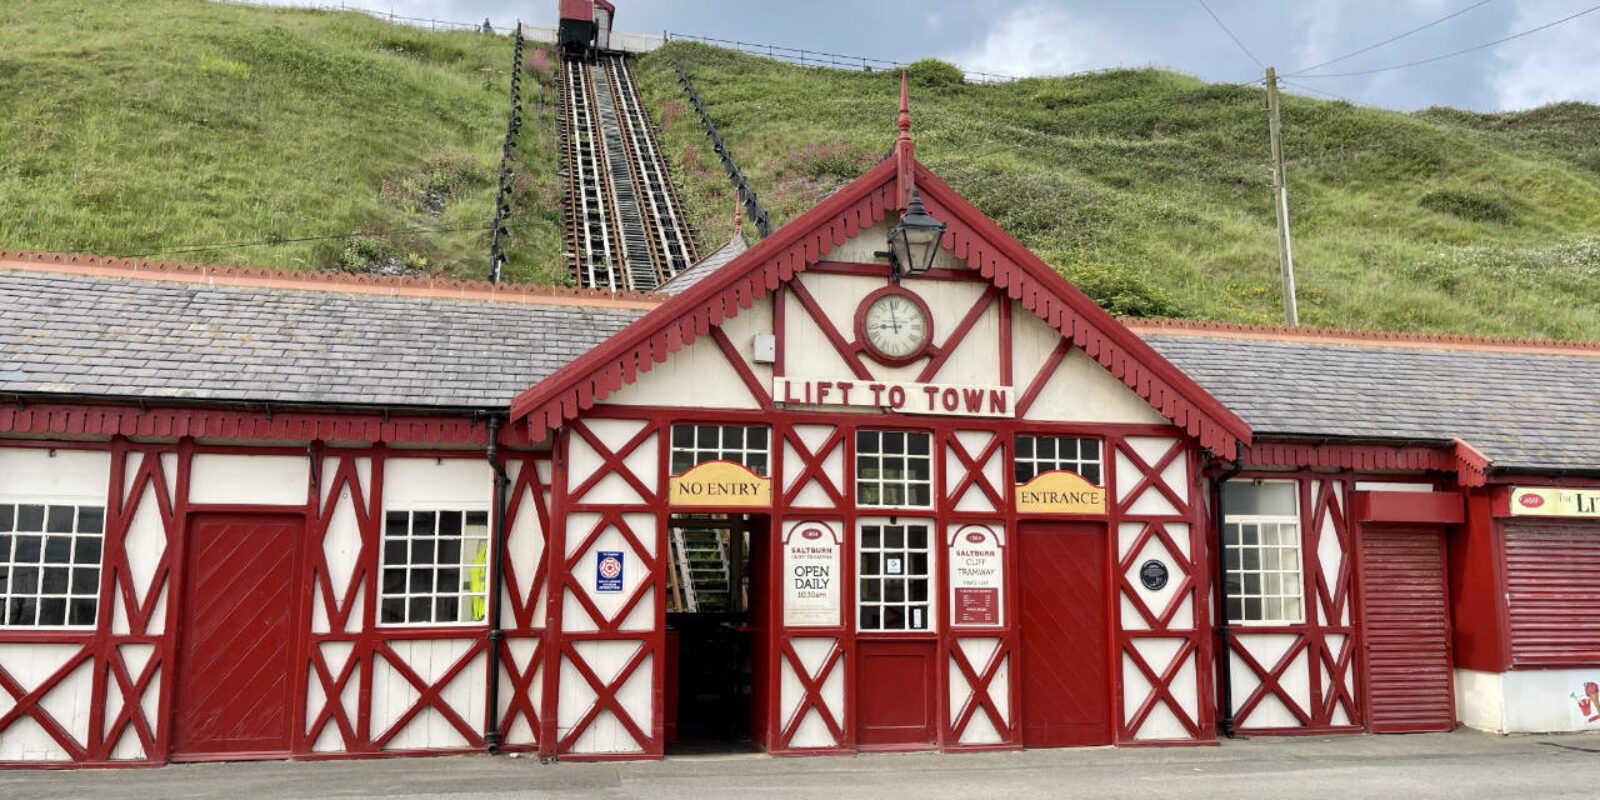 Saltburn Lift to Town Station